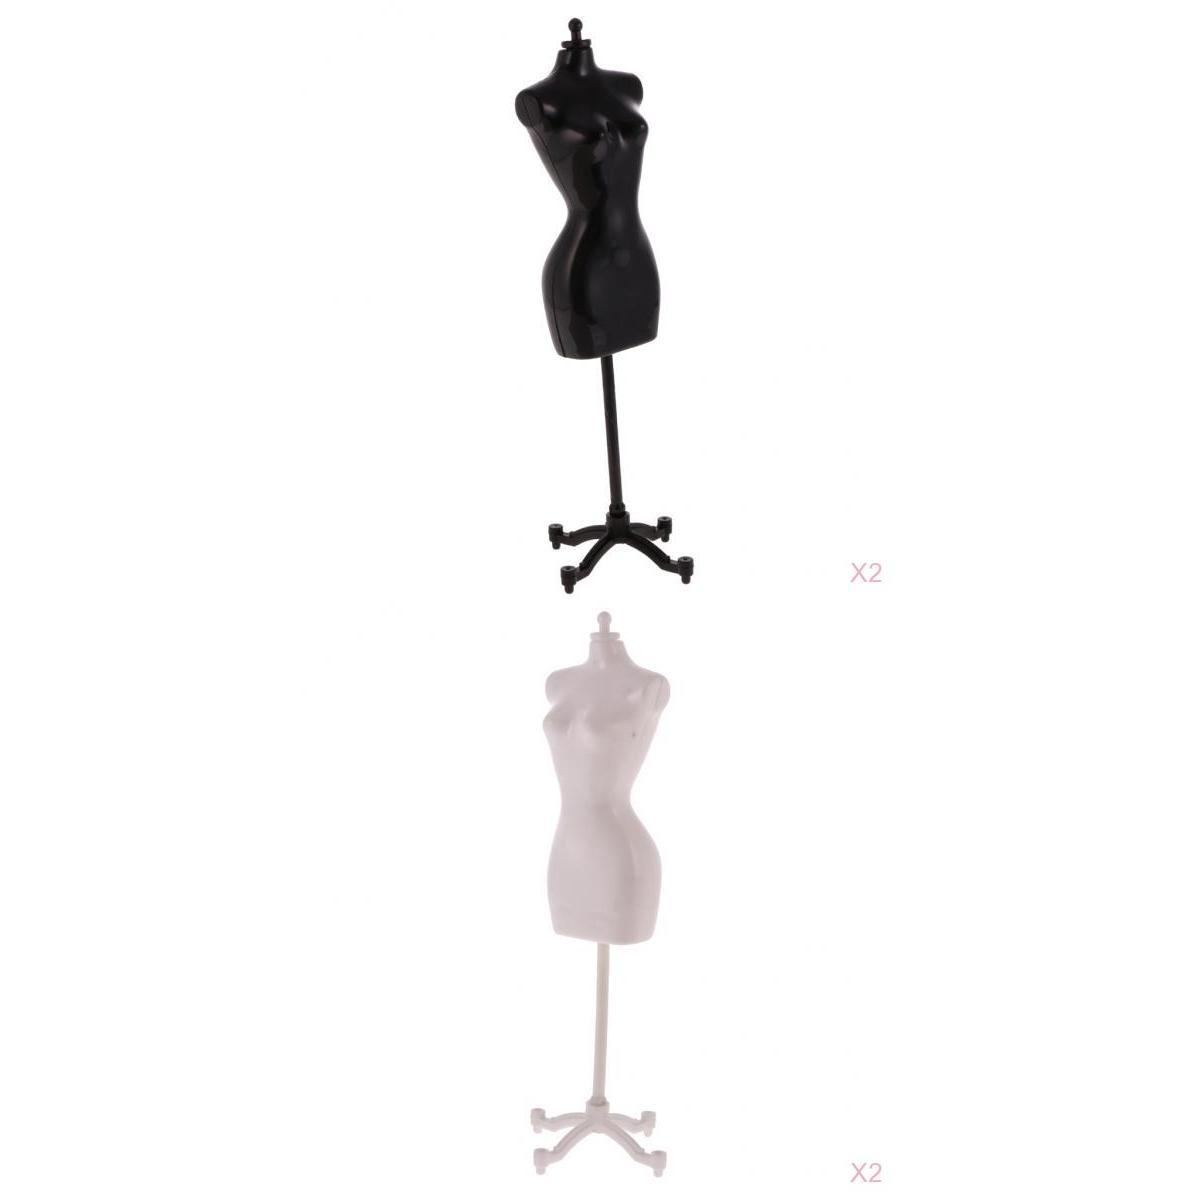 4 Pieces Display Holder Dress Clothes Mannequin Model Stand for fashion Doll